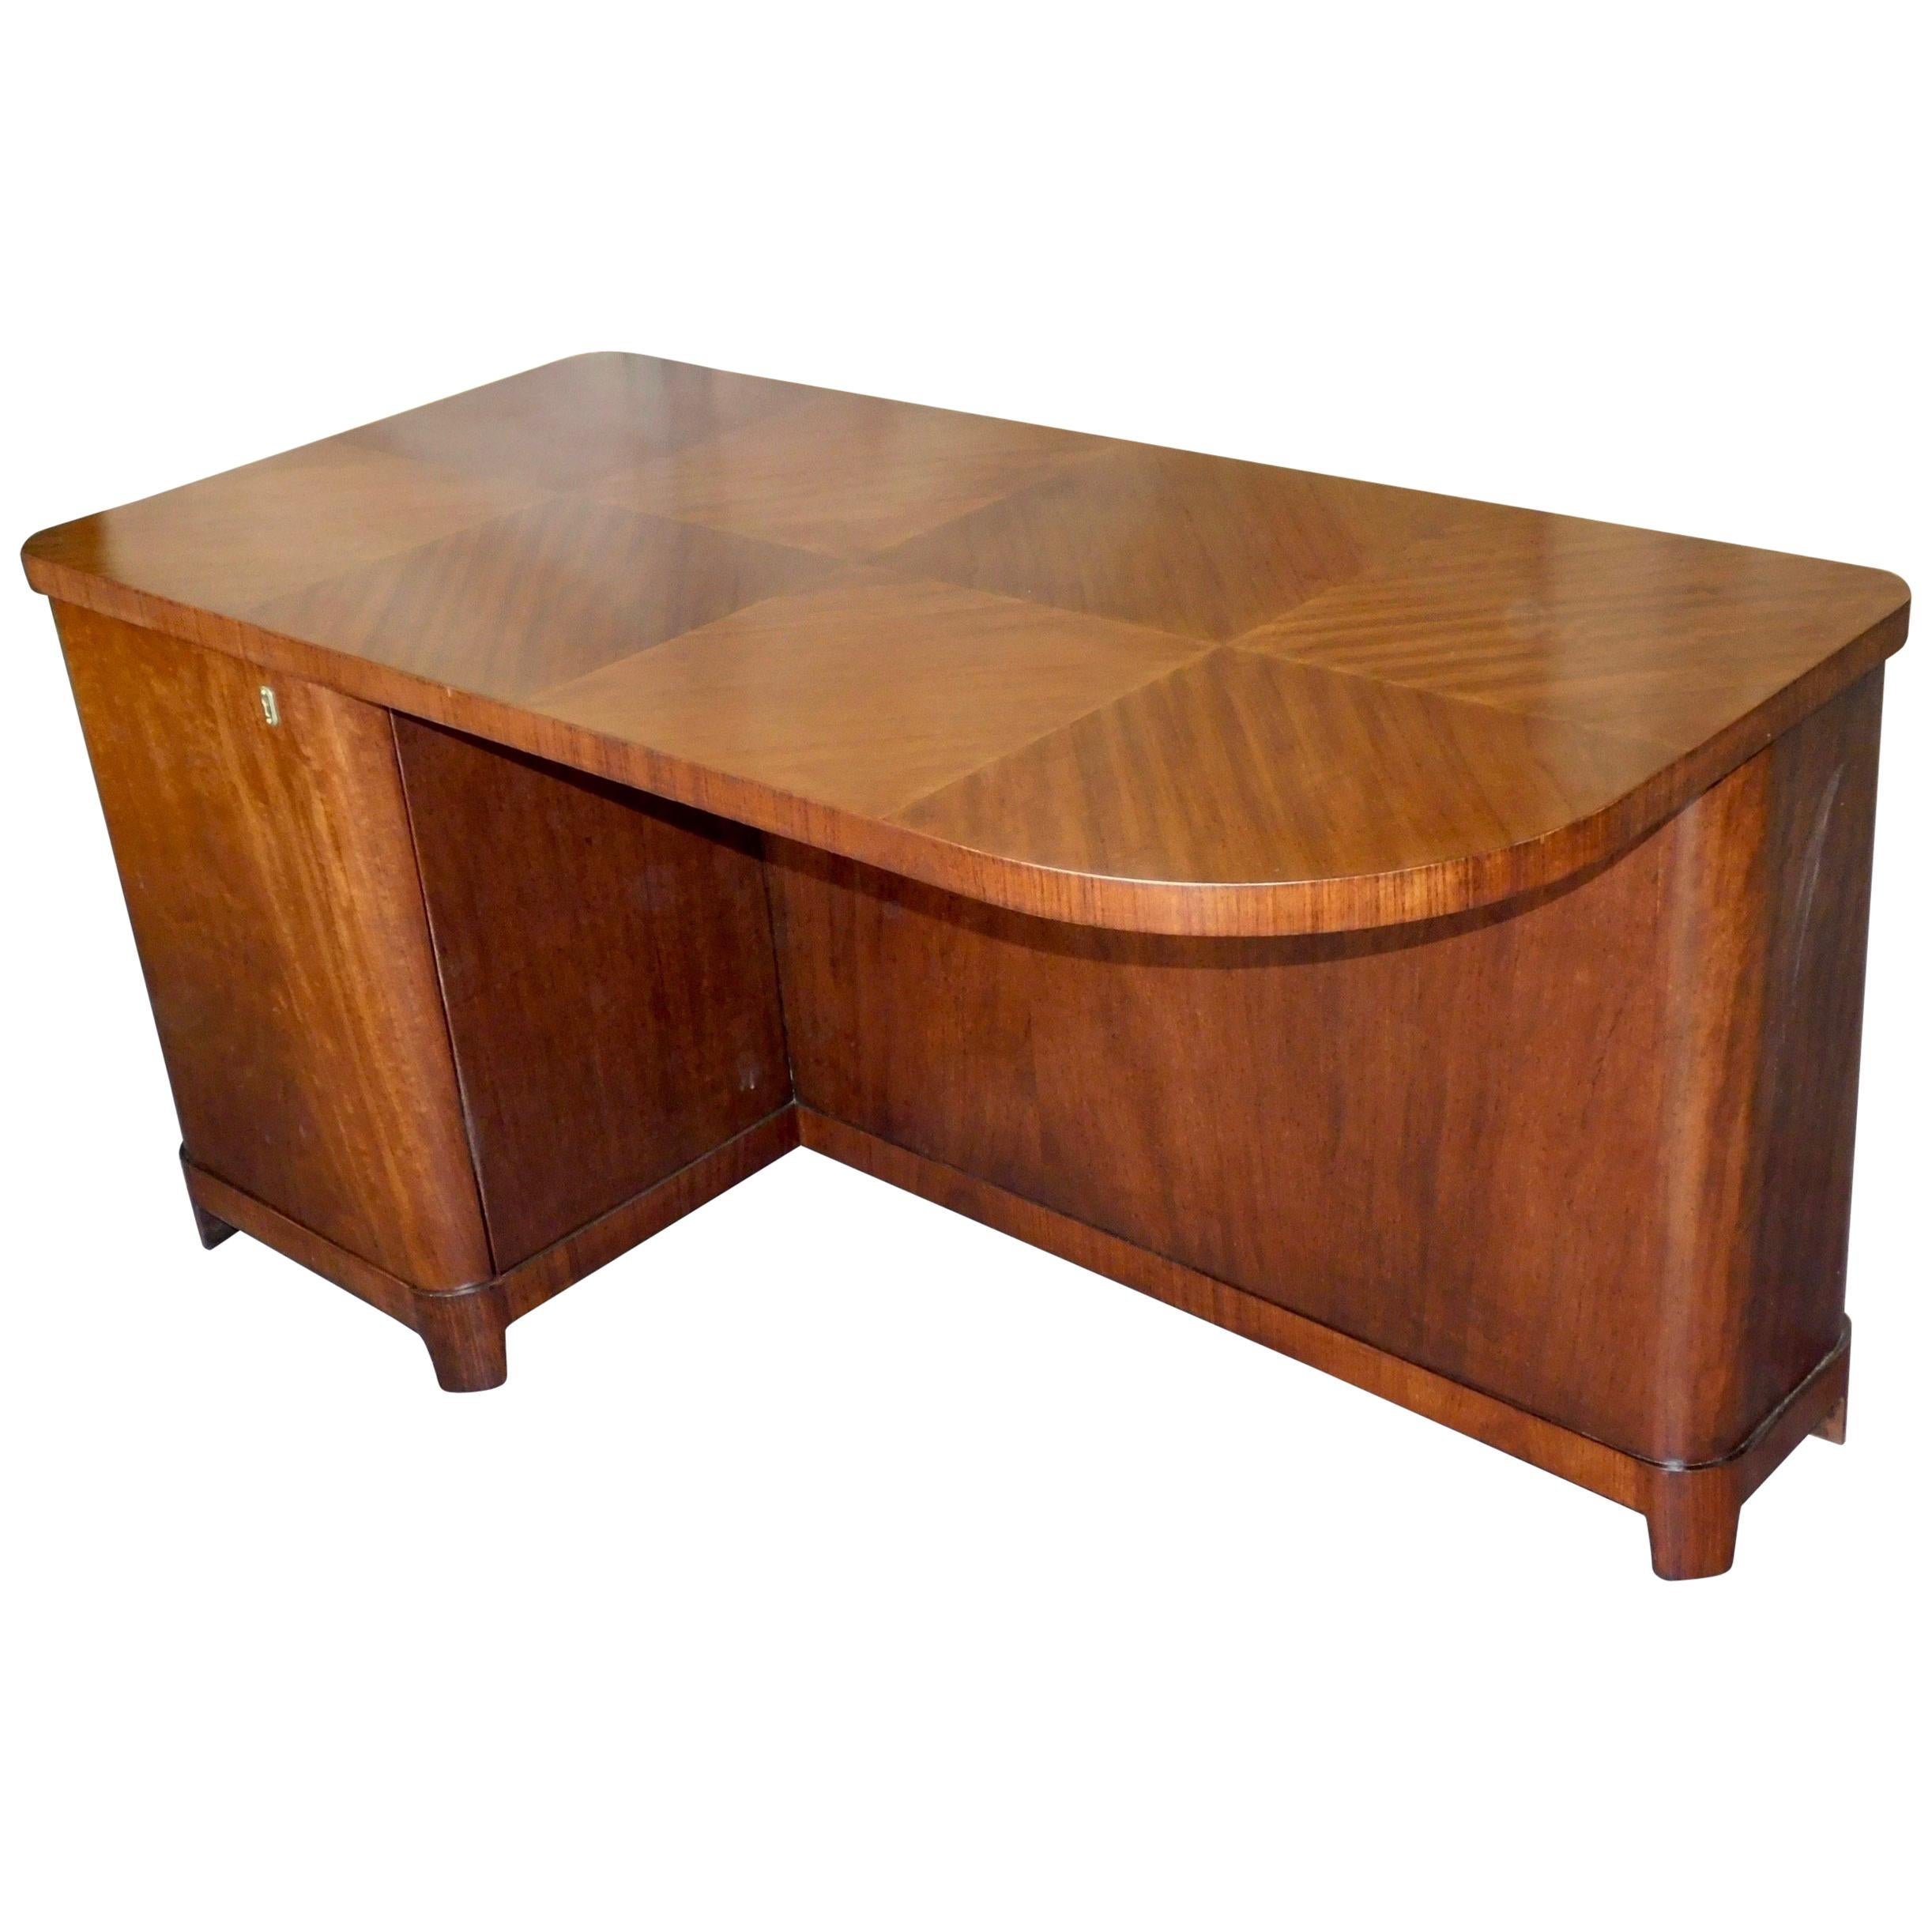 Swedish Art Moderne Desk in Flame Mahogany with Built-In Bookcase, circa 1940 For Sale